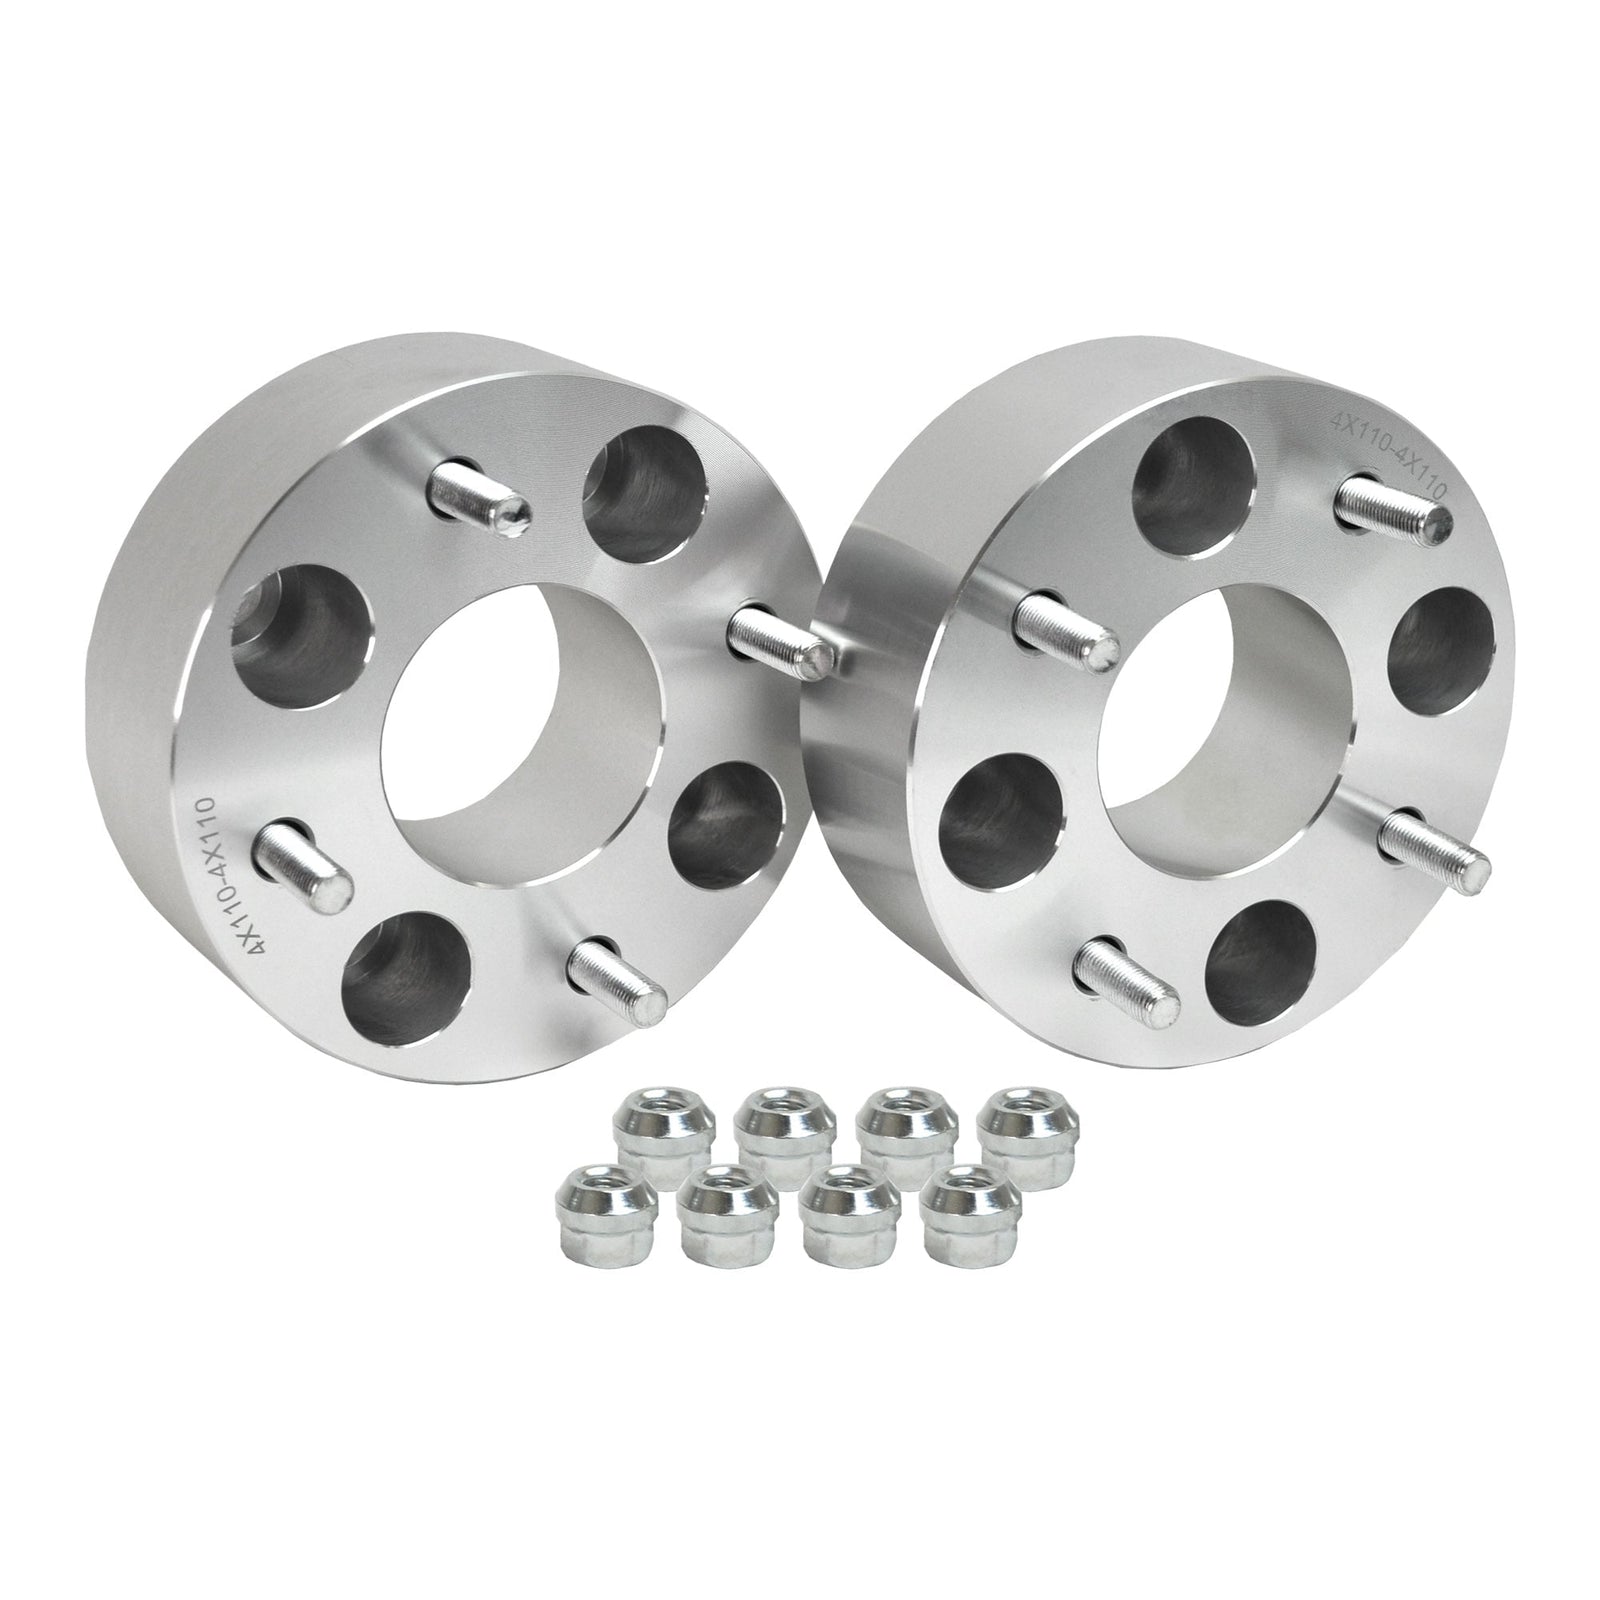 Bombardier Outlander 400 Max Rugged Wheel Spacer